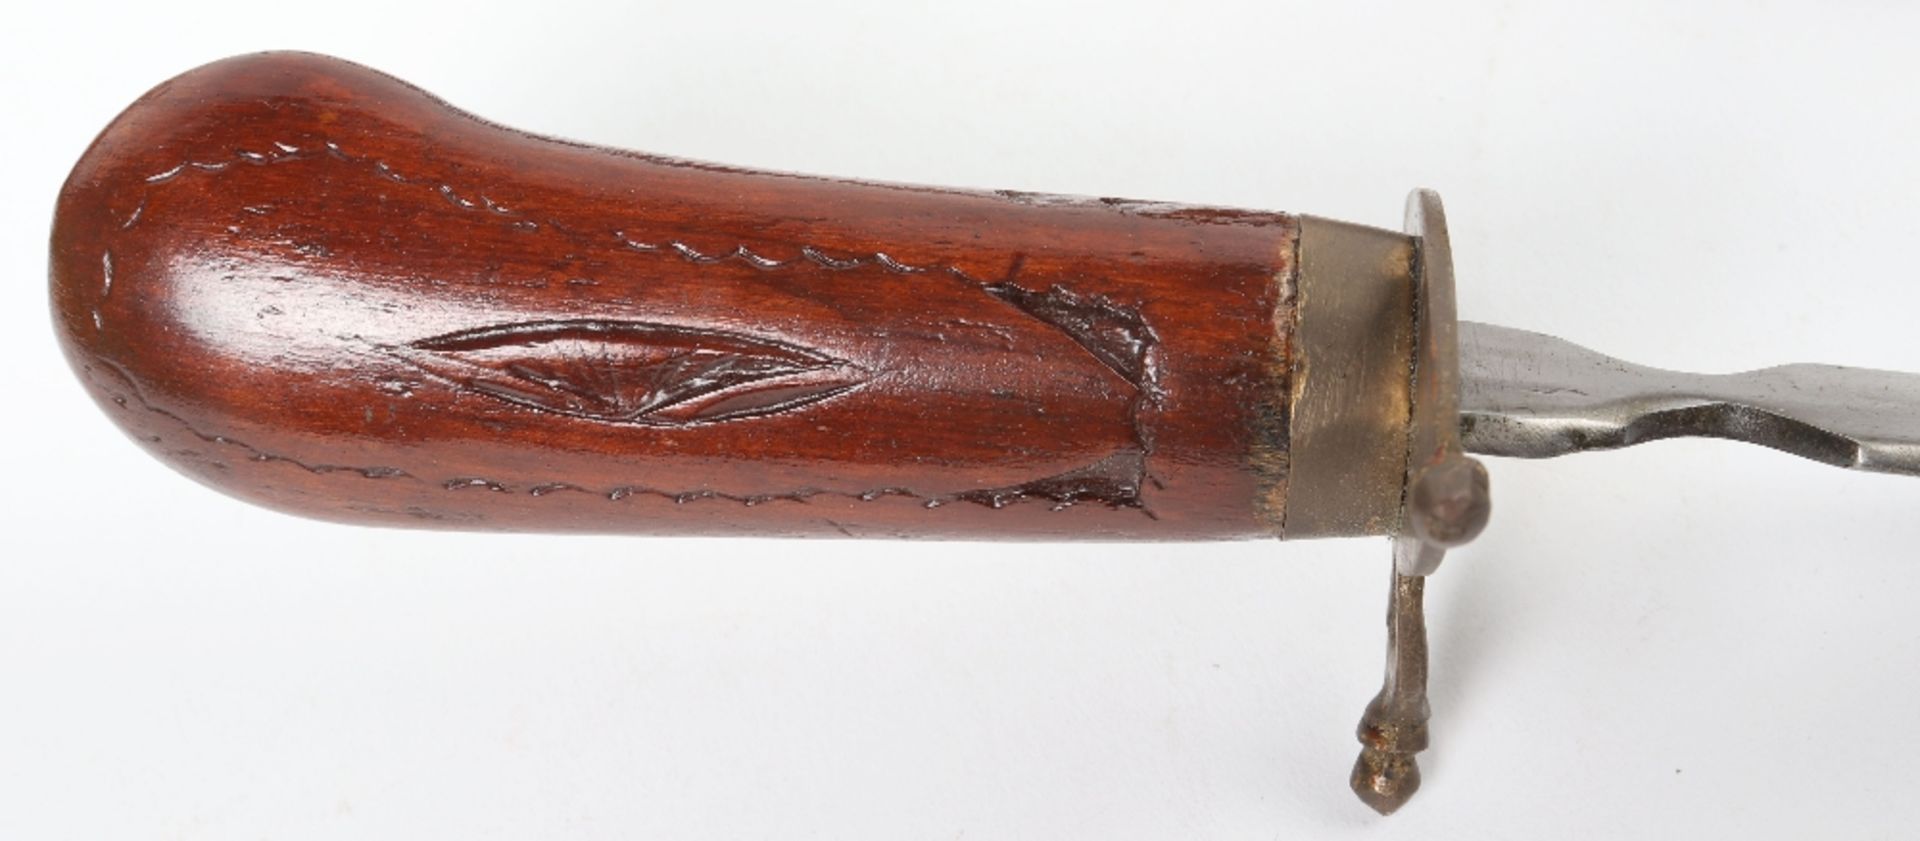 A French Gras rifle bayonet - Image 8 of 28